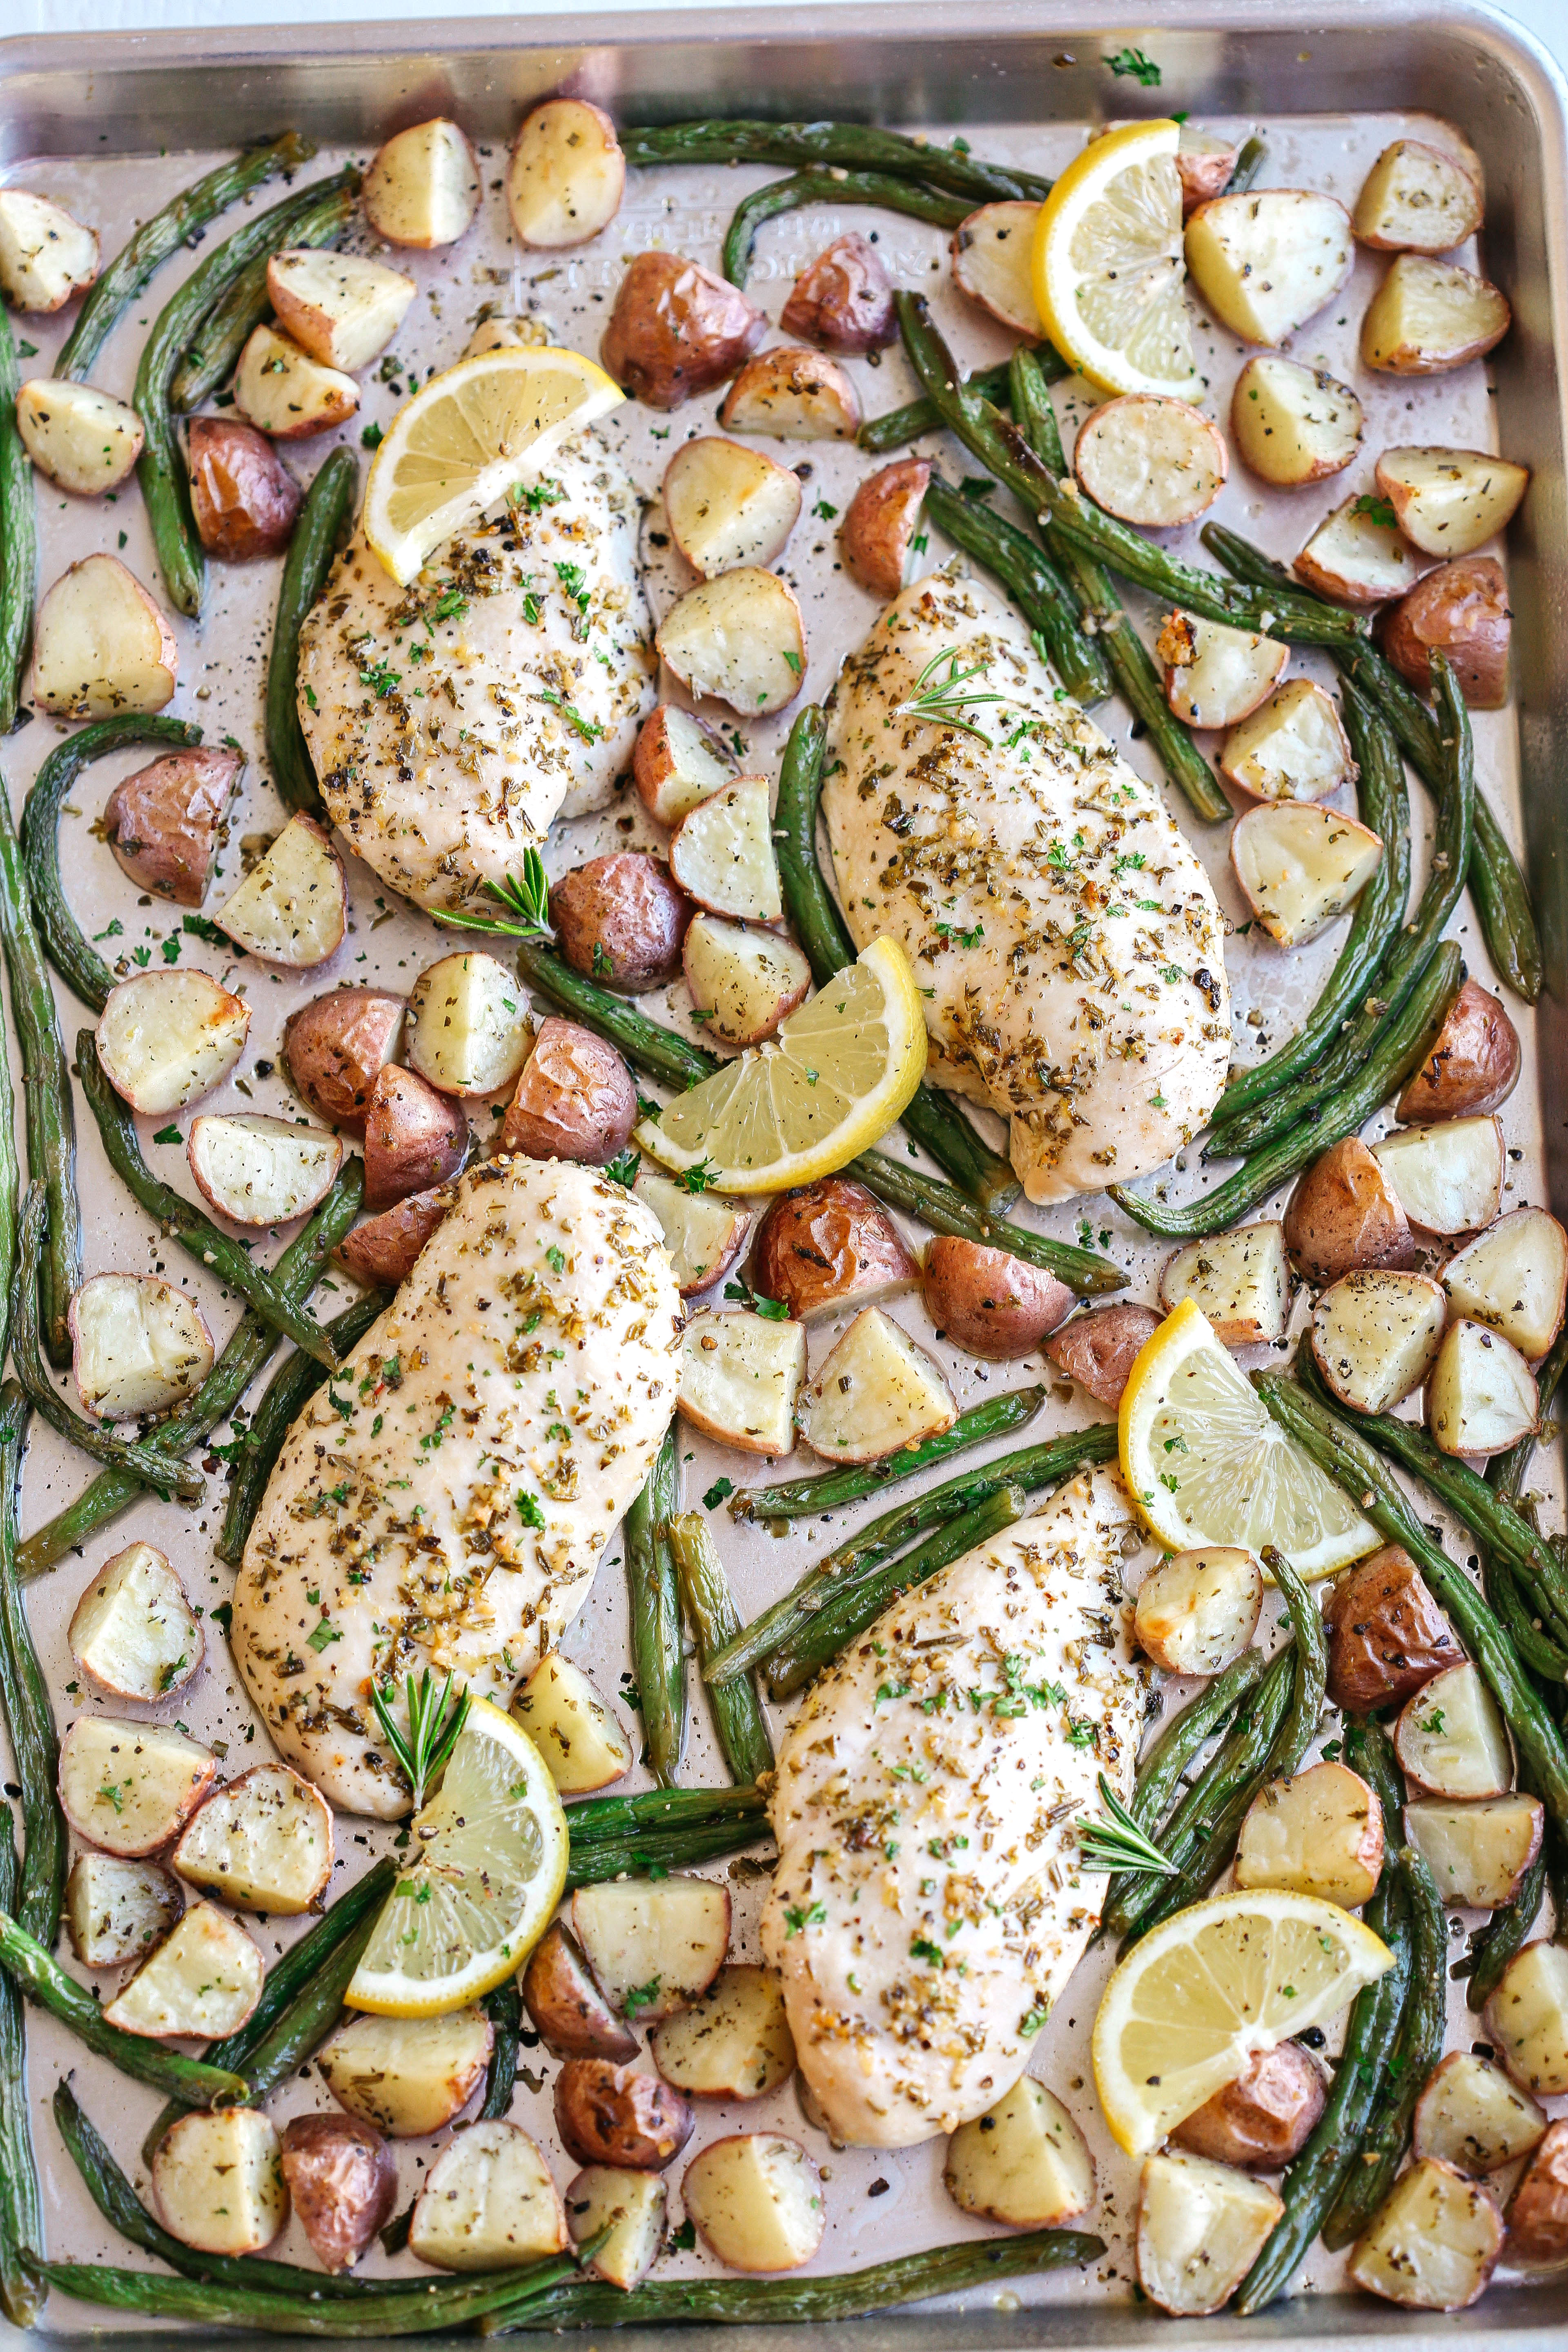 This Sheet Pan Lemon Rosemary Chicken and Potatoes make the perfect weeknight dinner that's quick, healthy and easily made all on one pan!